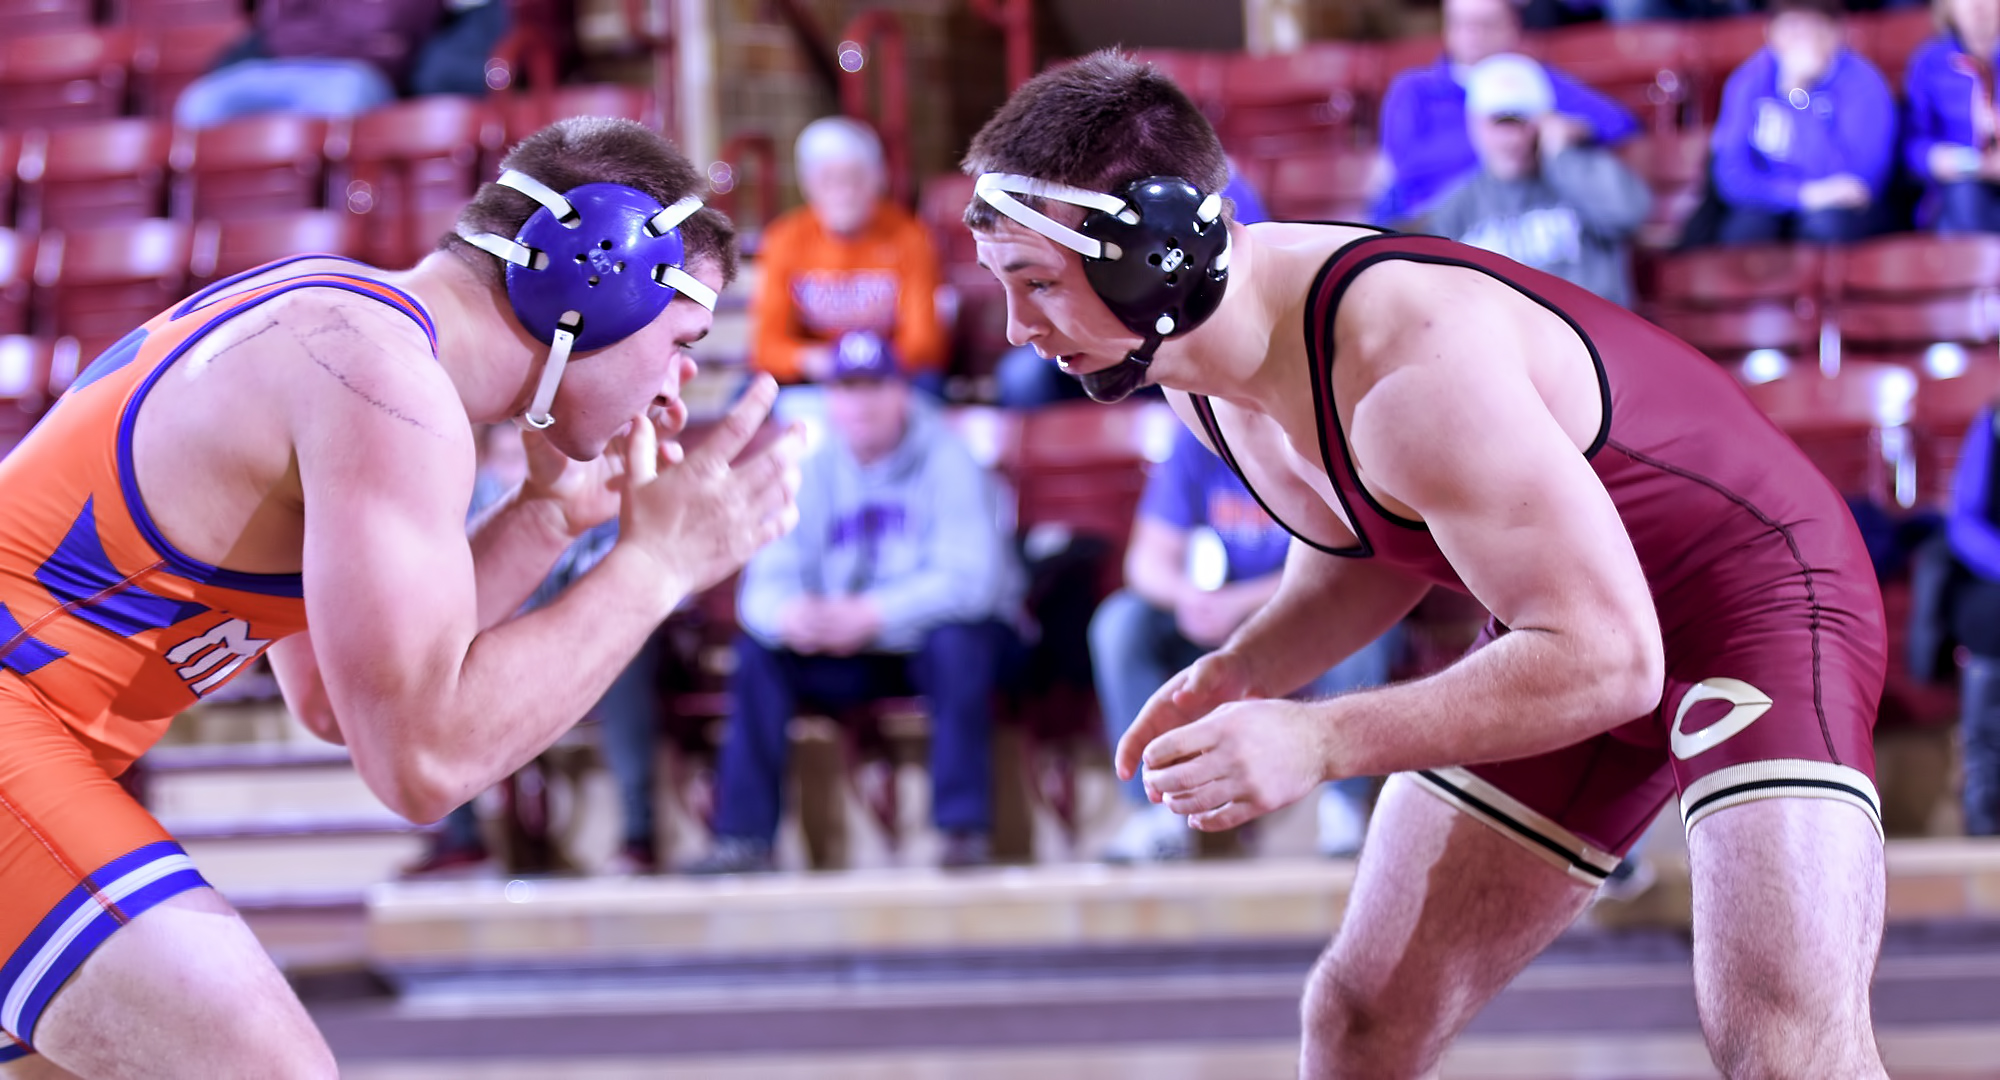 Sophomore Jacob Arends fell behind 10-1 after the first period against the #6 wrestler in DII but almost came all the way back to force OT in his bout at 197 in the Cobbers' match at the University of Mary.